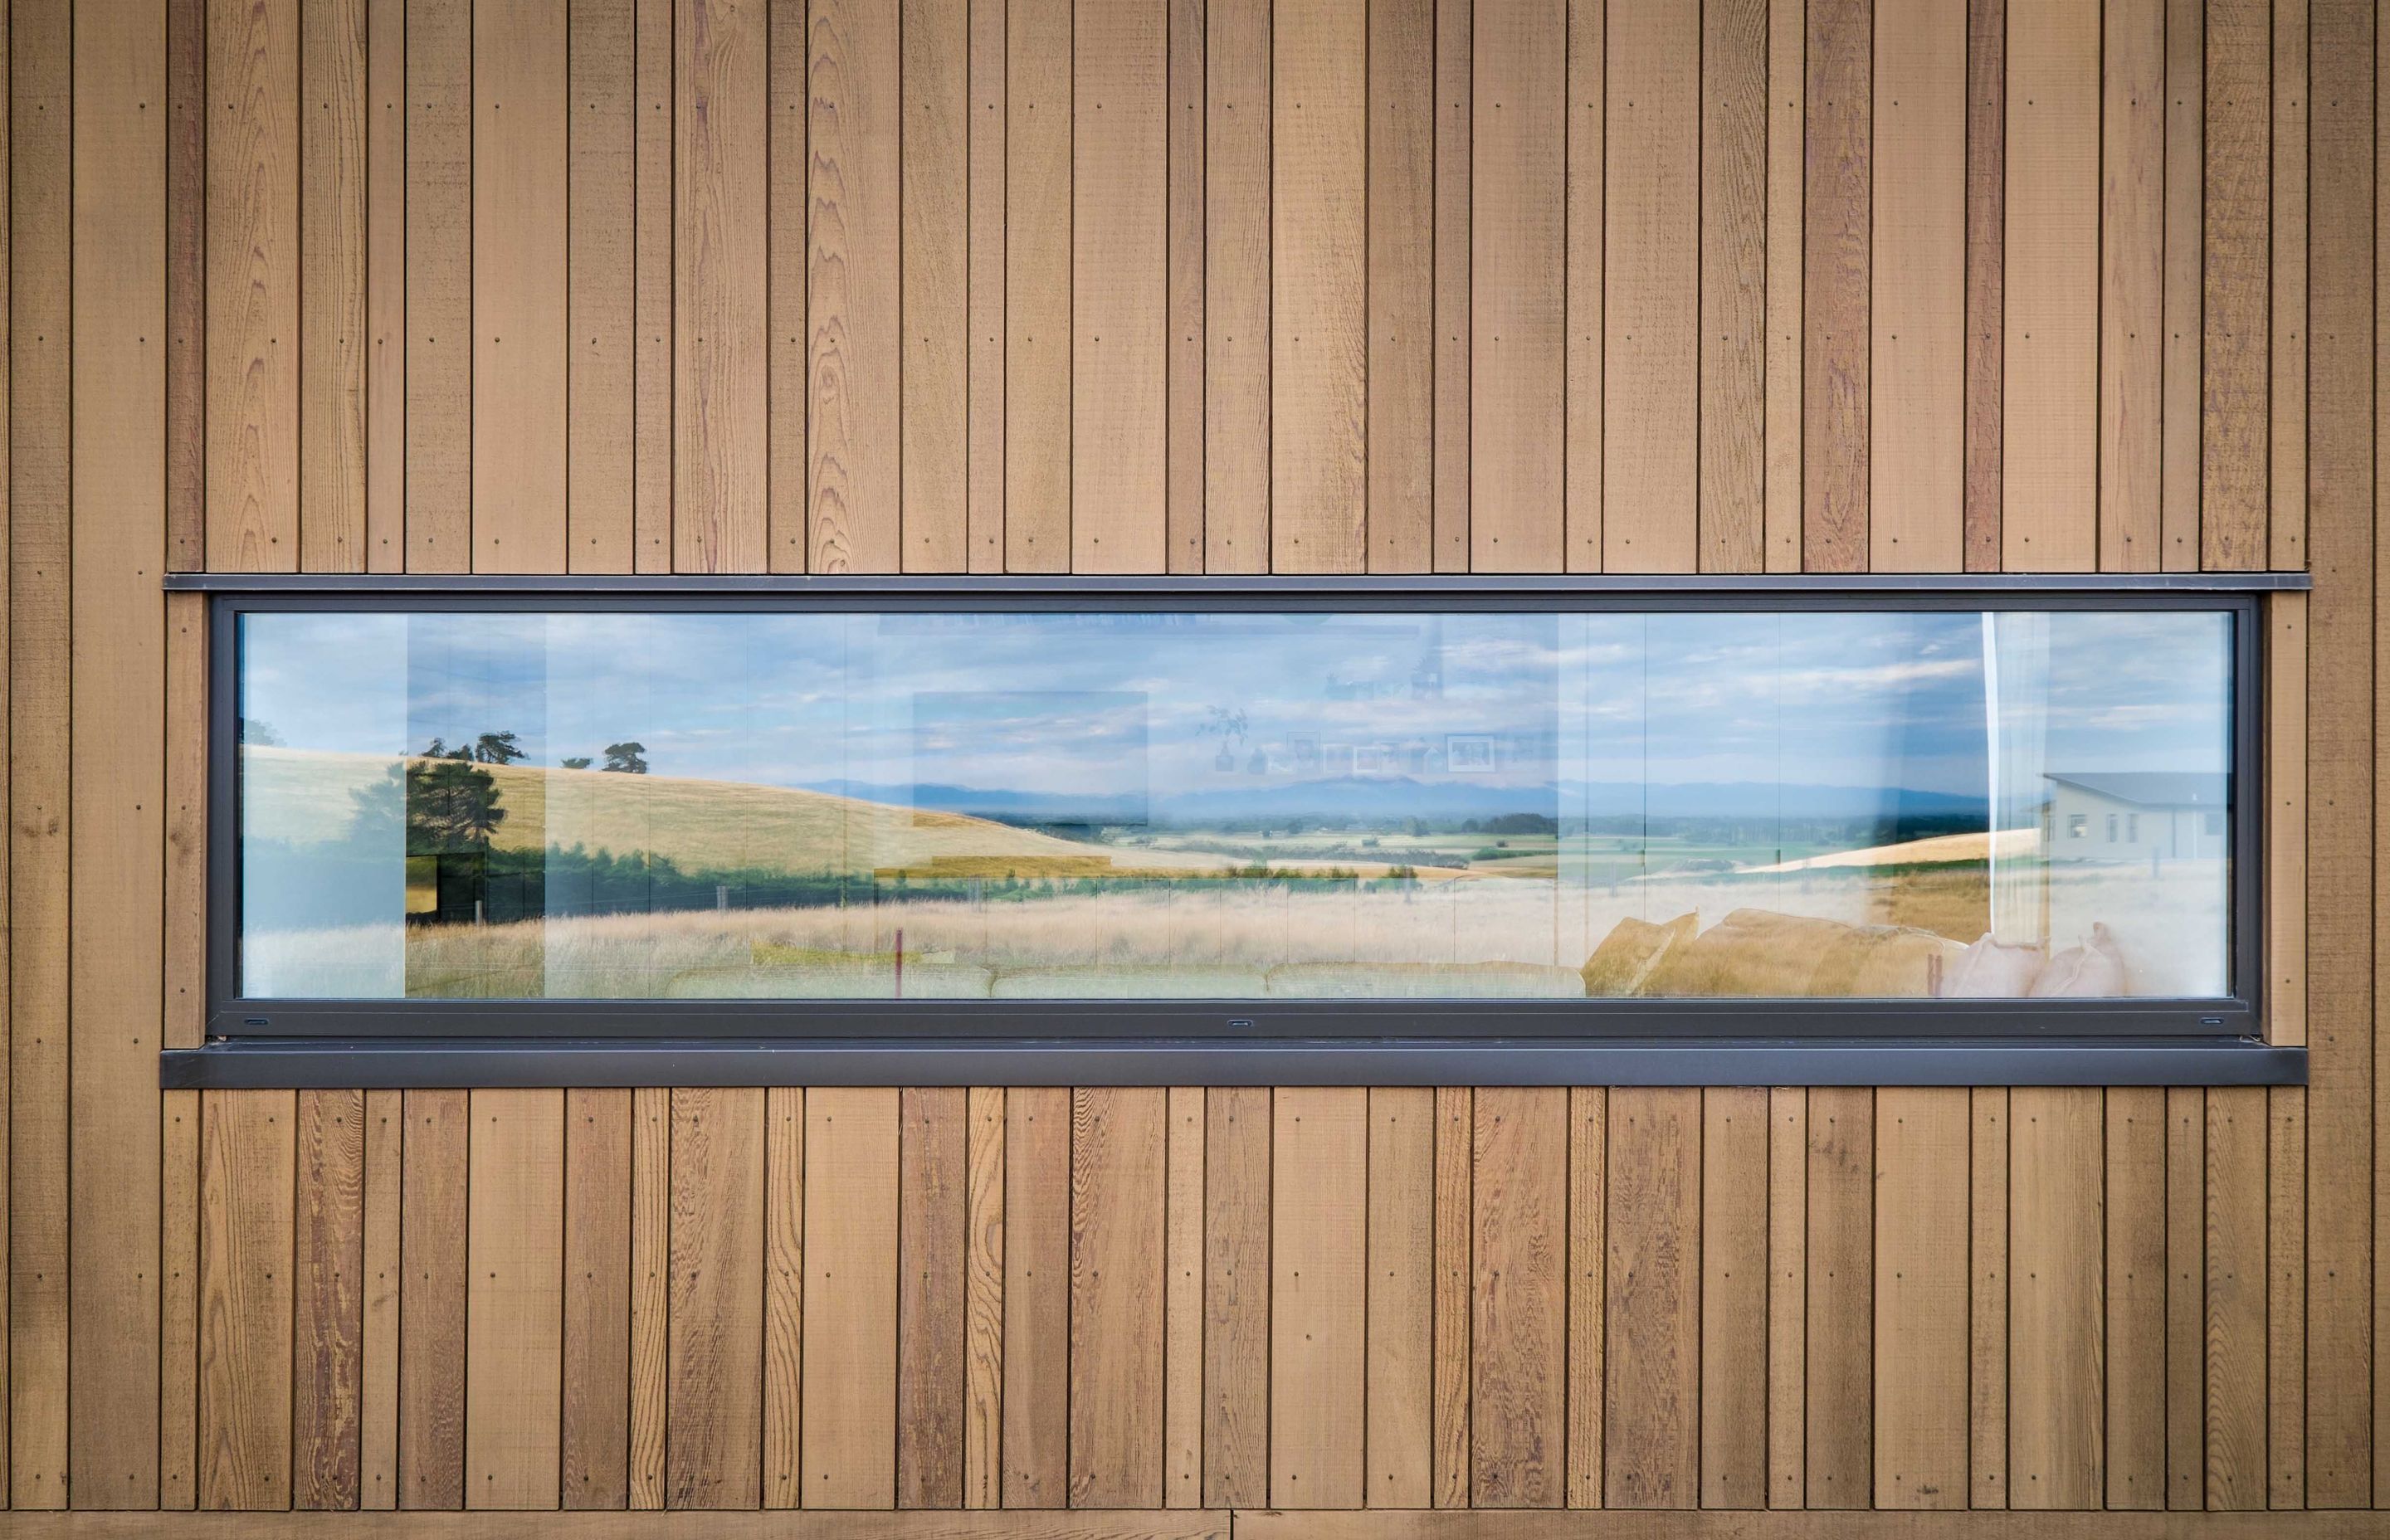 This Dalman Architecture project uses the INTERSET® Recessed Window Flashing System with random width cedar cladding